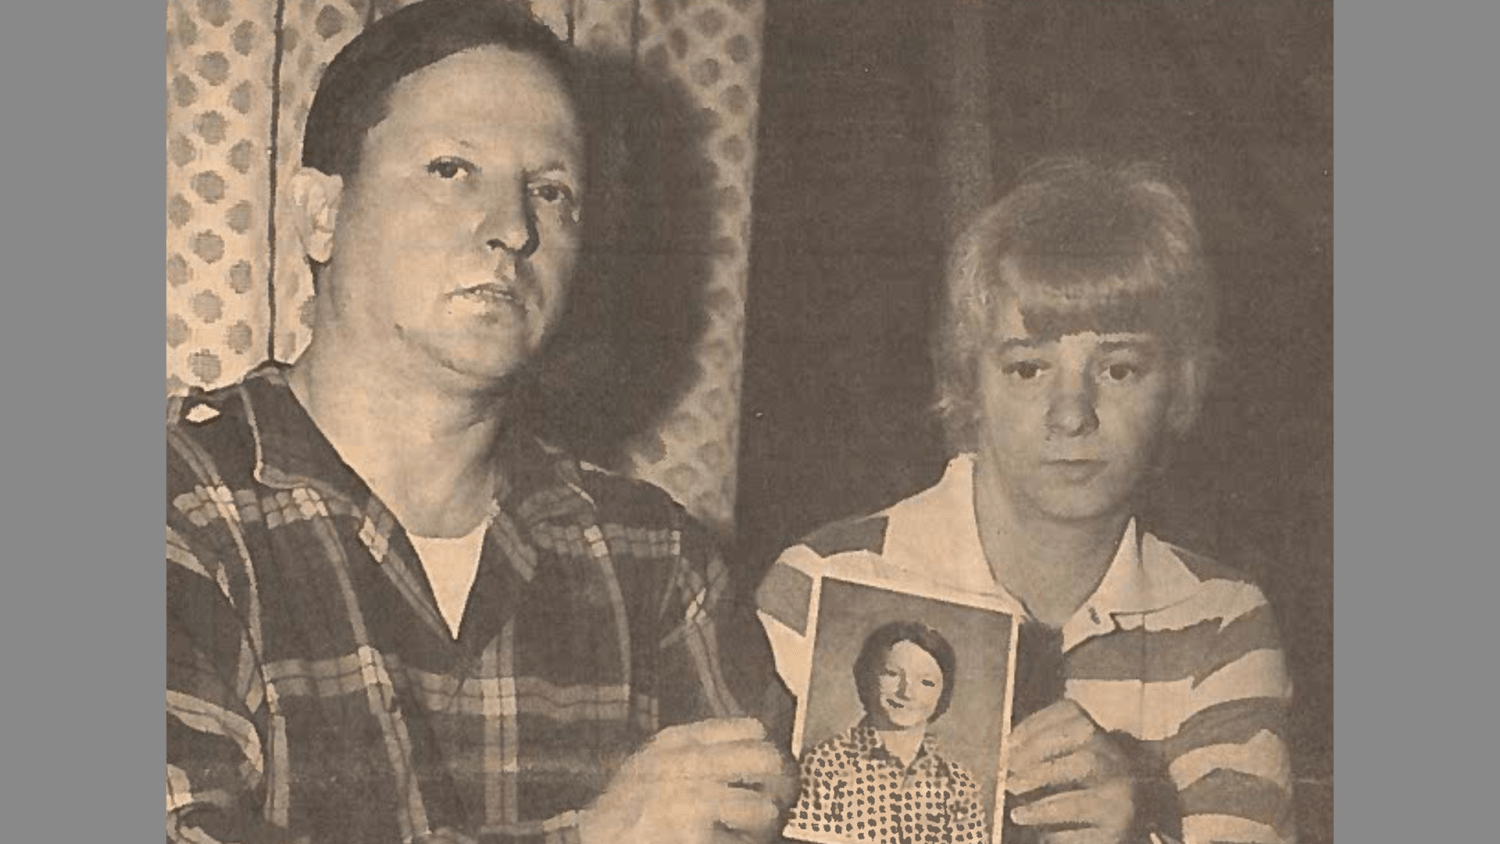 Karl Heikell Michigan cold case warming up decades later